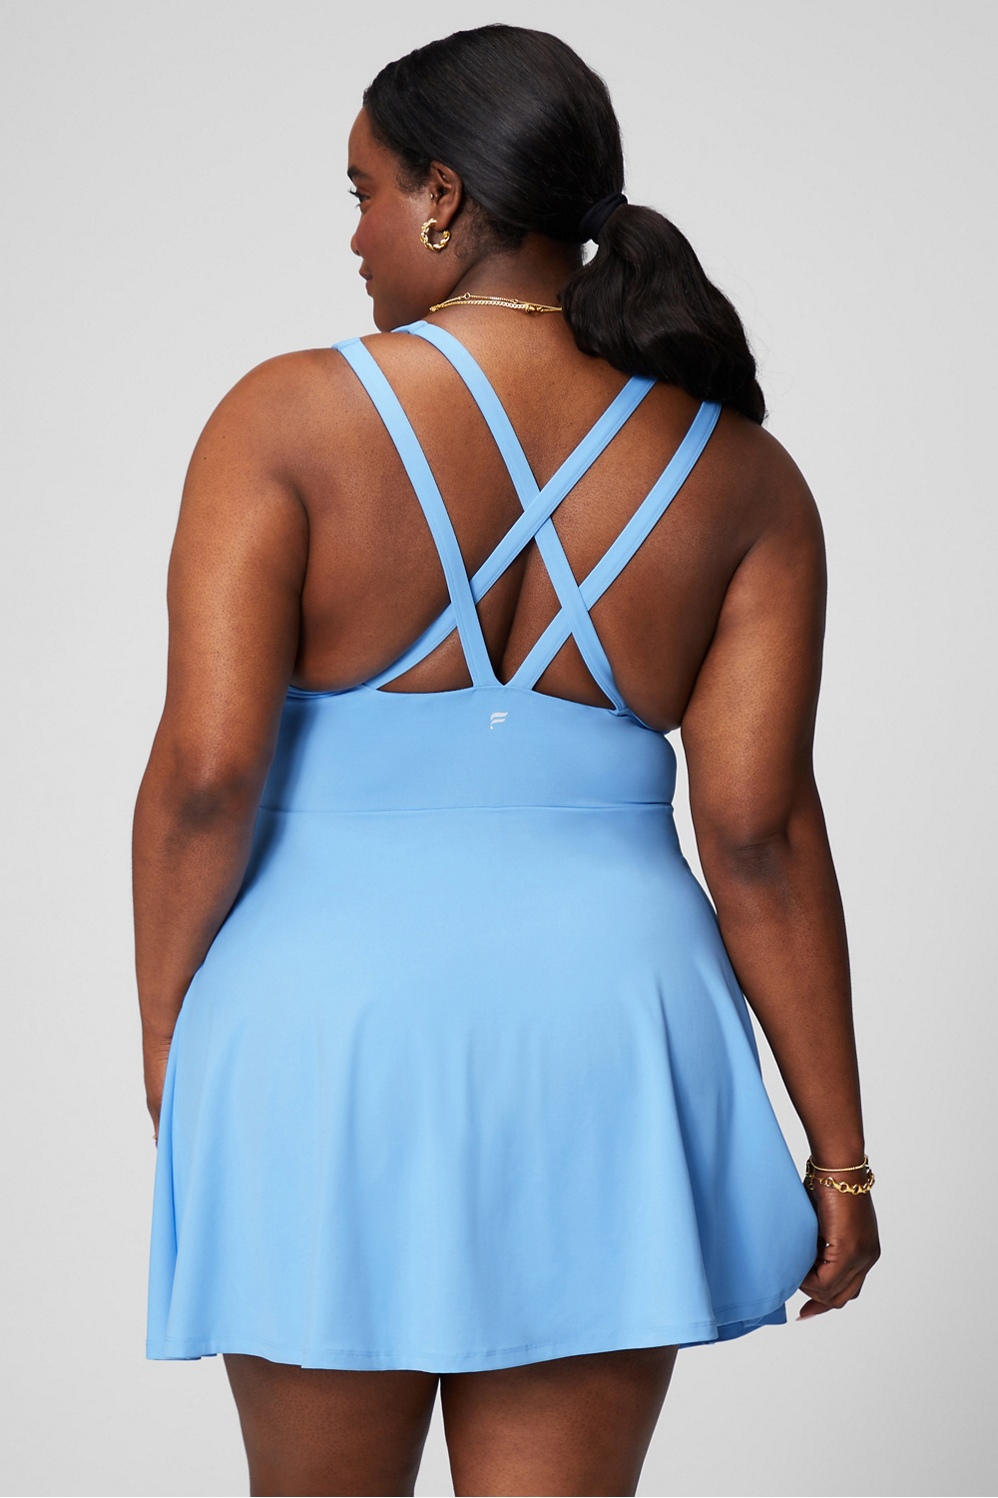 New plus size dress review from @fabletics #fabletics #athleticswear #, Dress